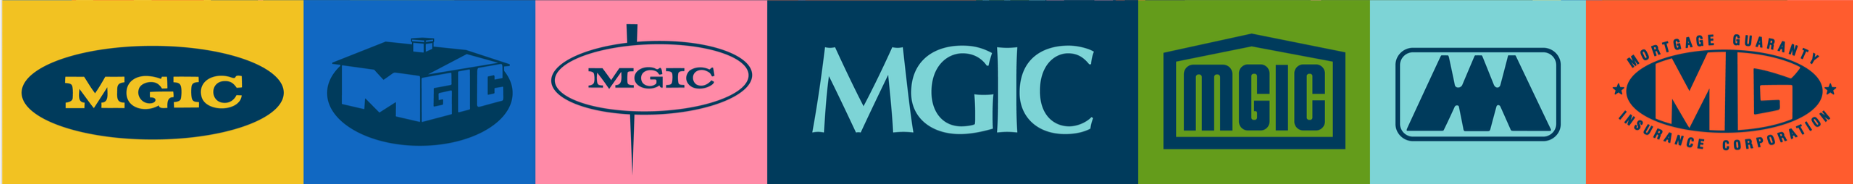 timeline showing evolution of mgic logos through the years